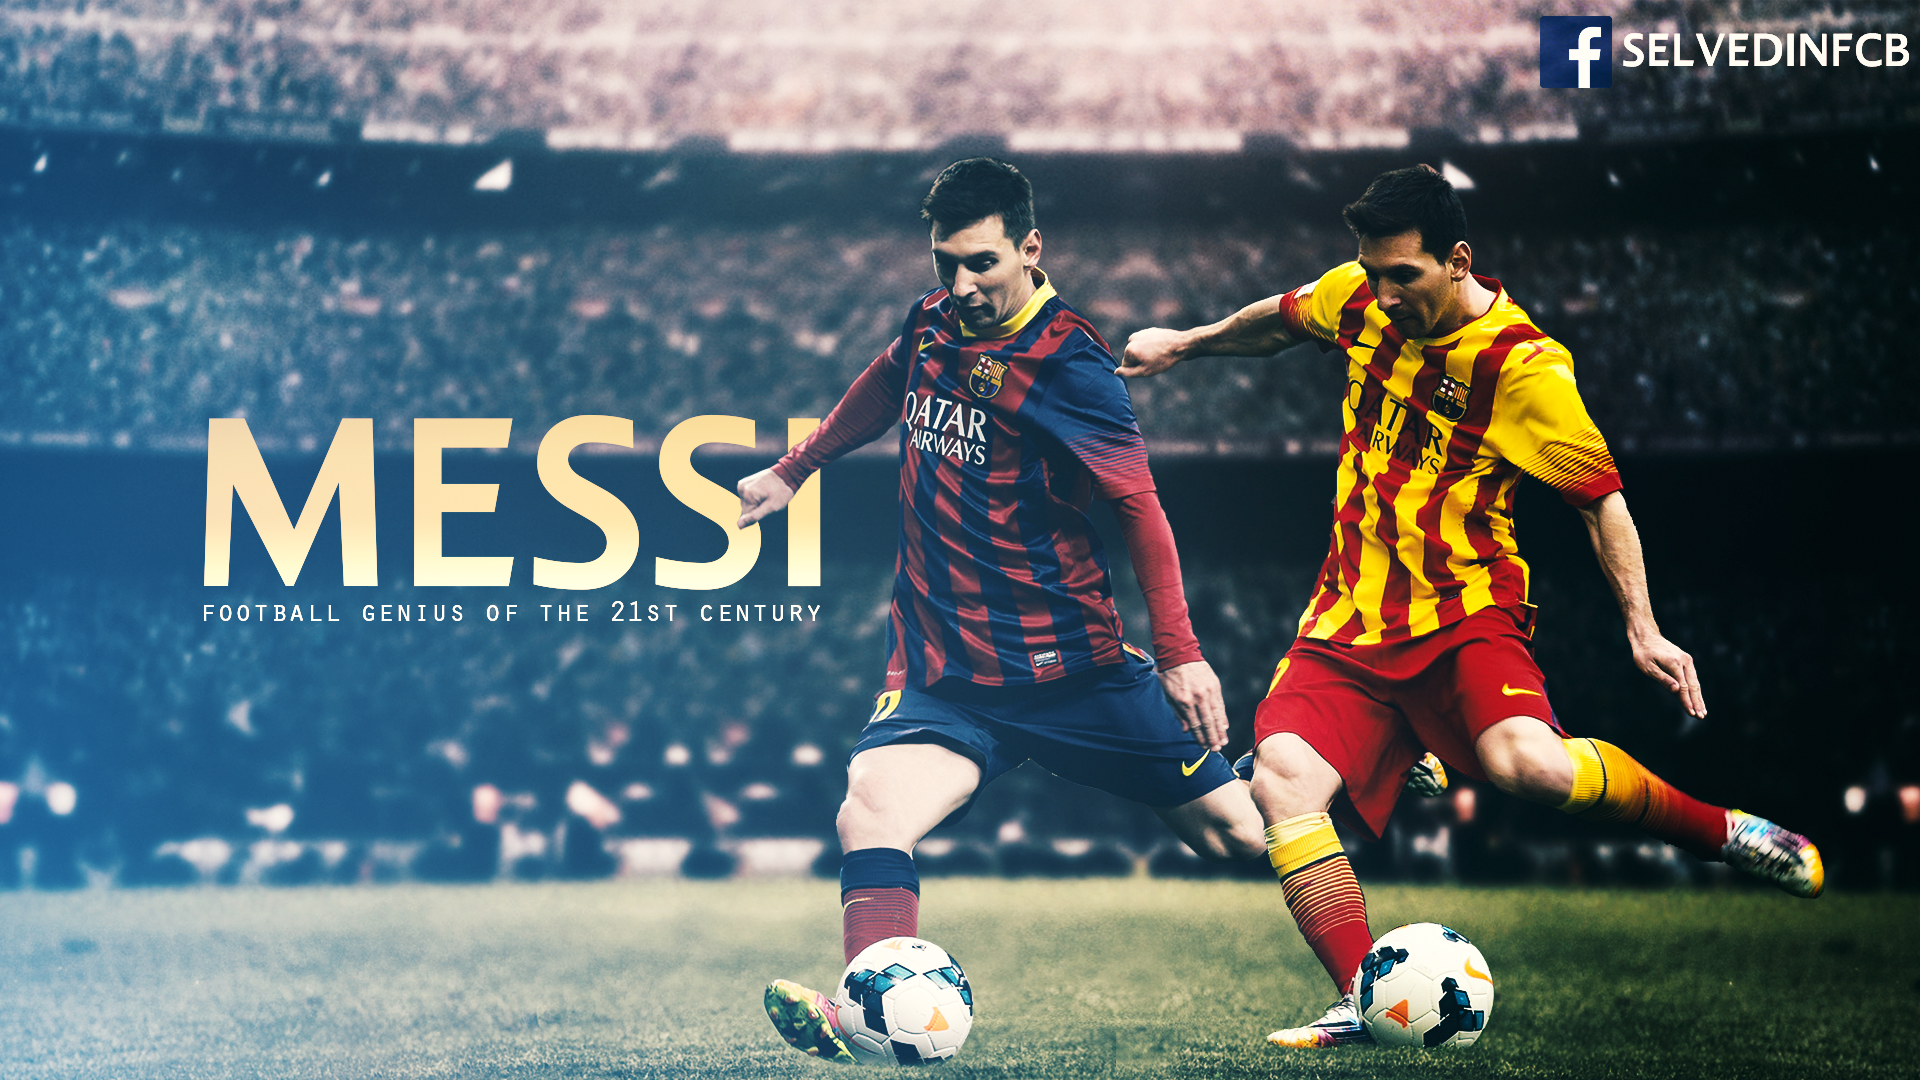 Free download Lionel Messi 2014 Wallpaper HD by SelvedinFCB ...